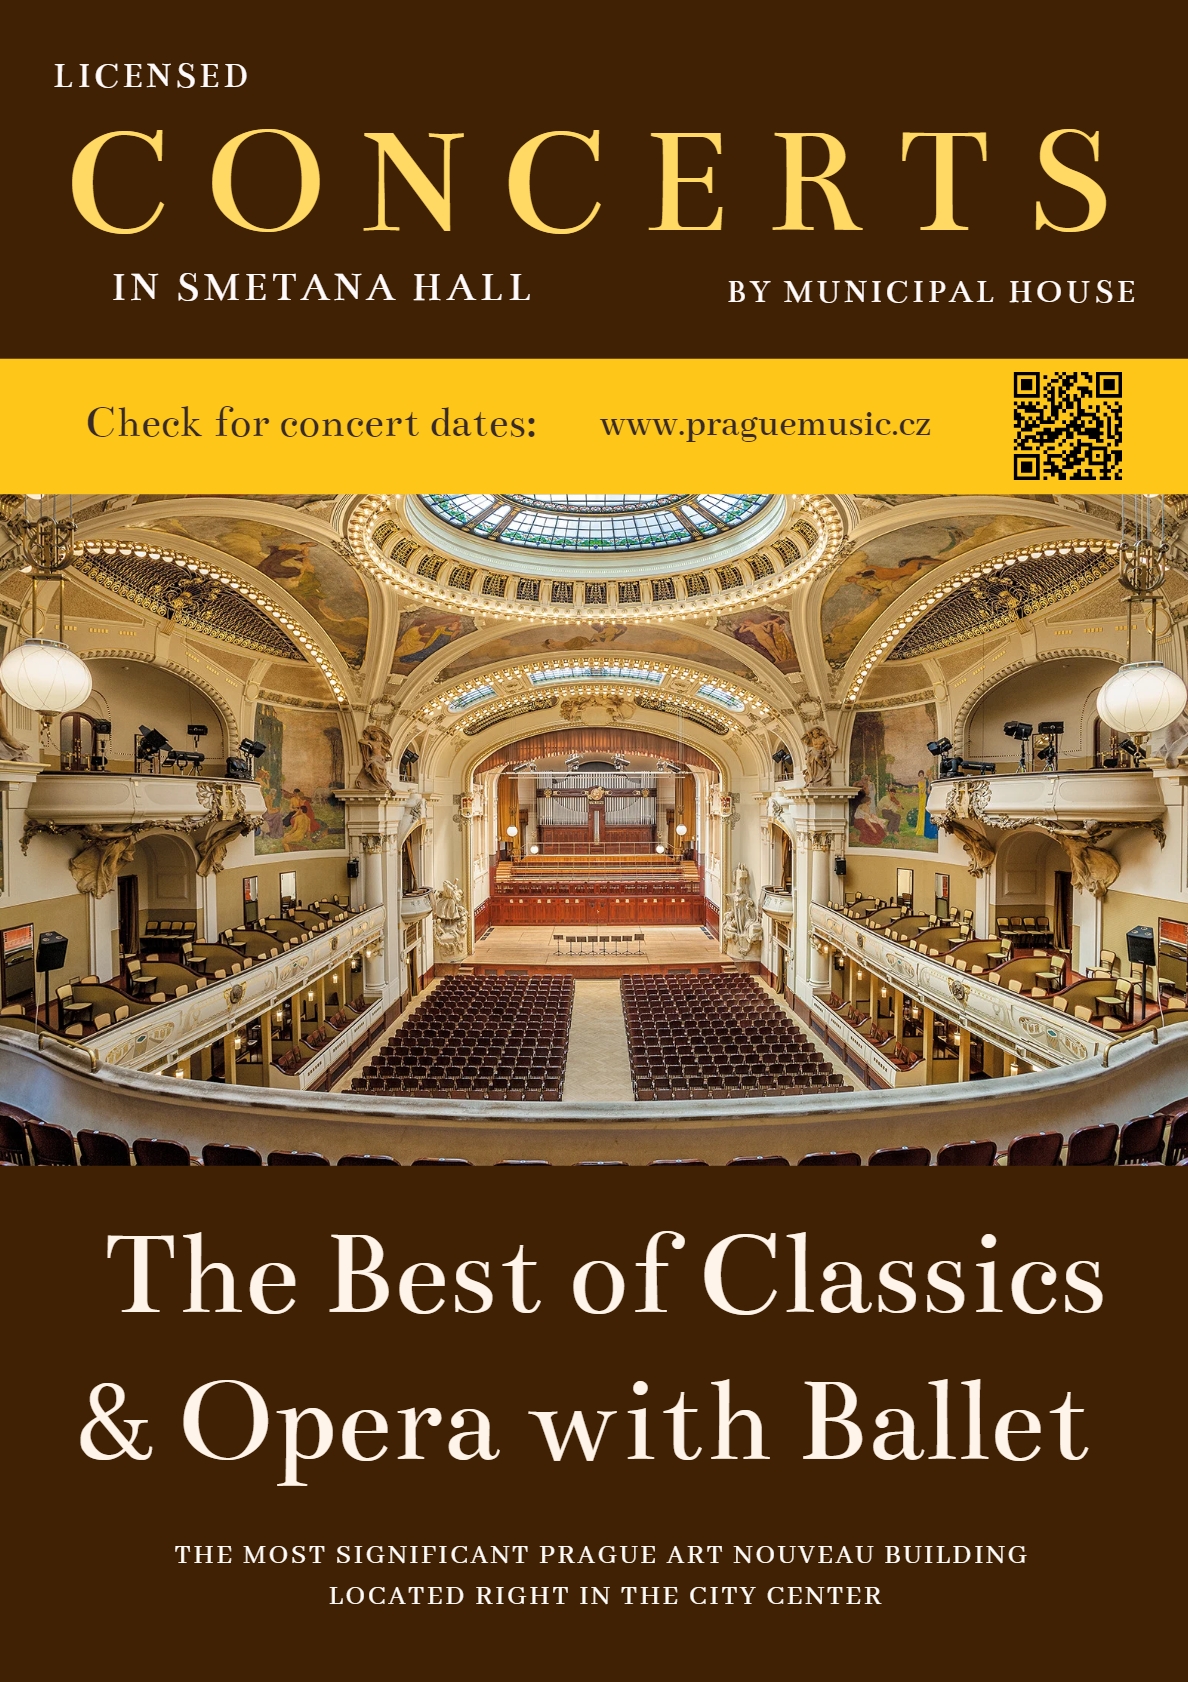 The Best of Classics & Opera with Ballet